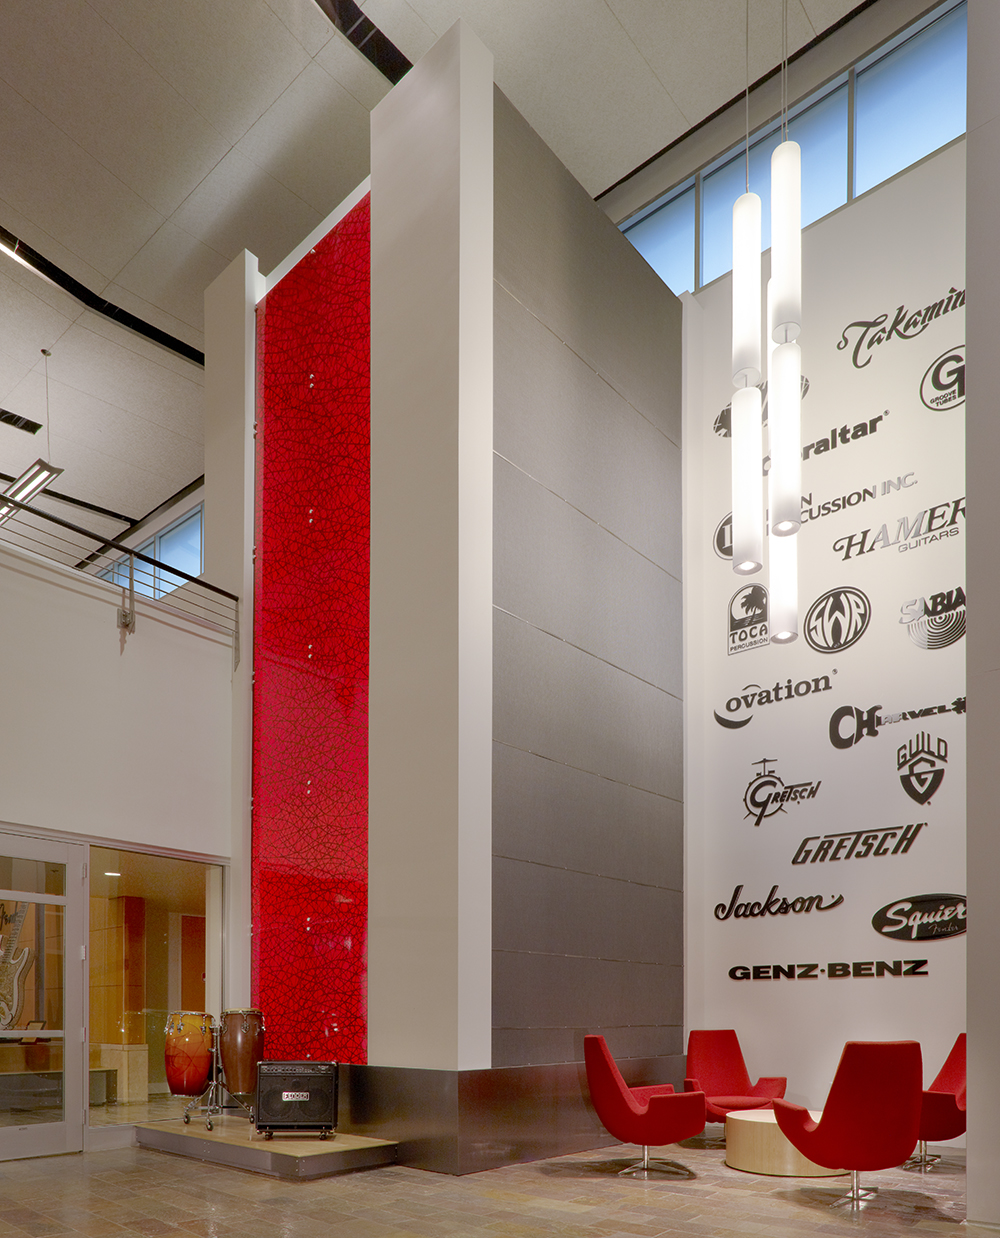 Sequence pendants provide eye-catching illumination in a large light fixture configuration for a high-ceiling lobby above red chairs.